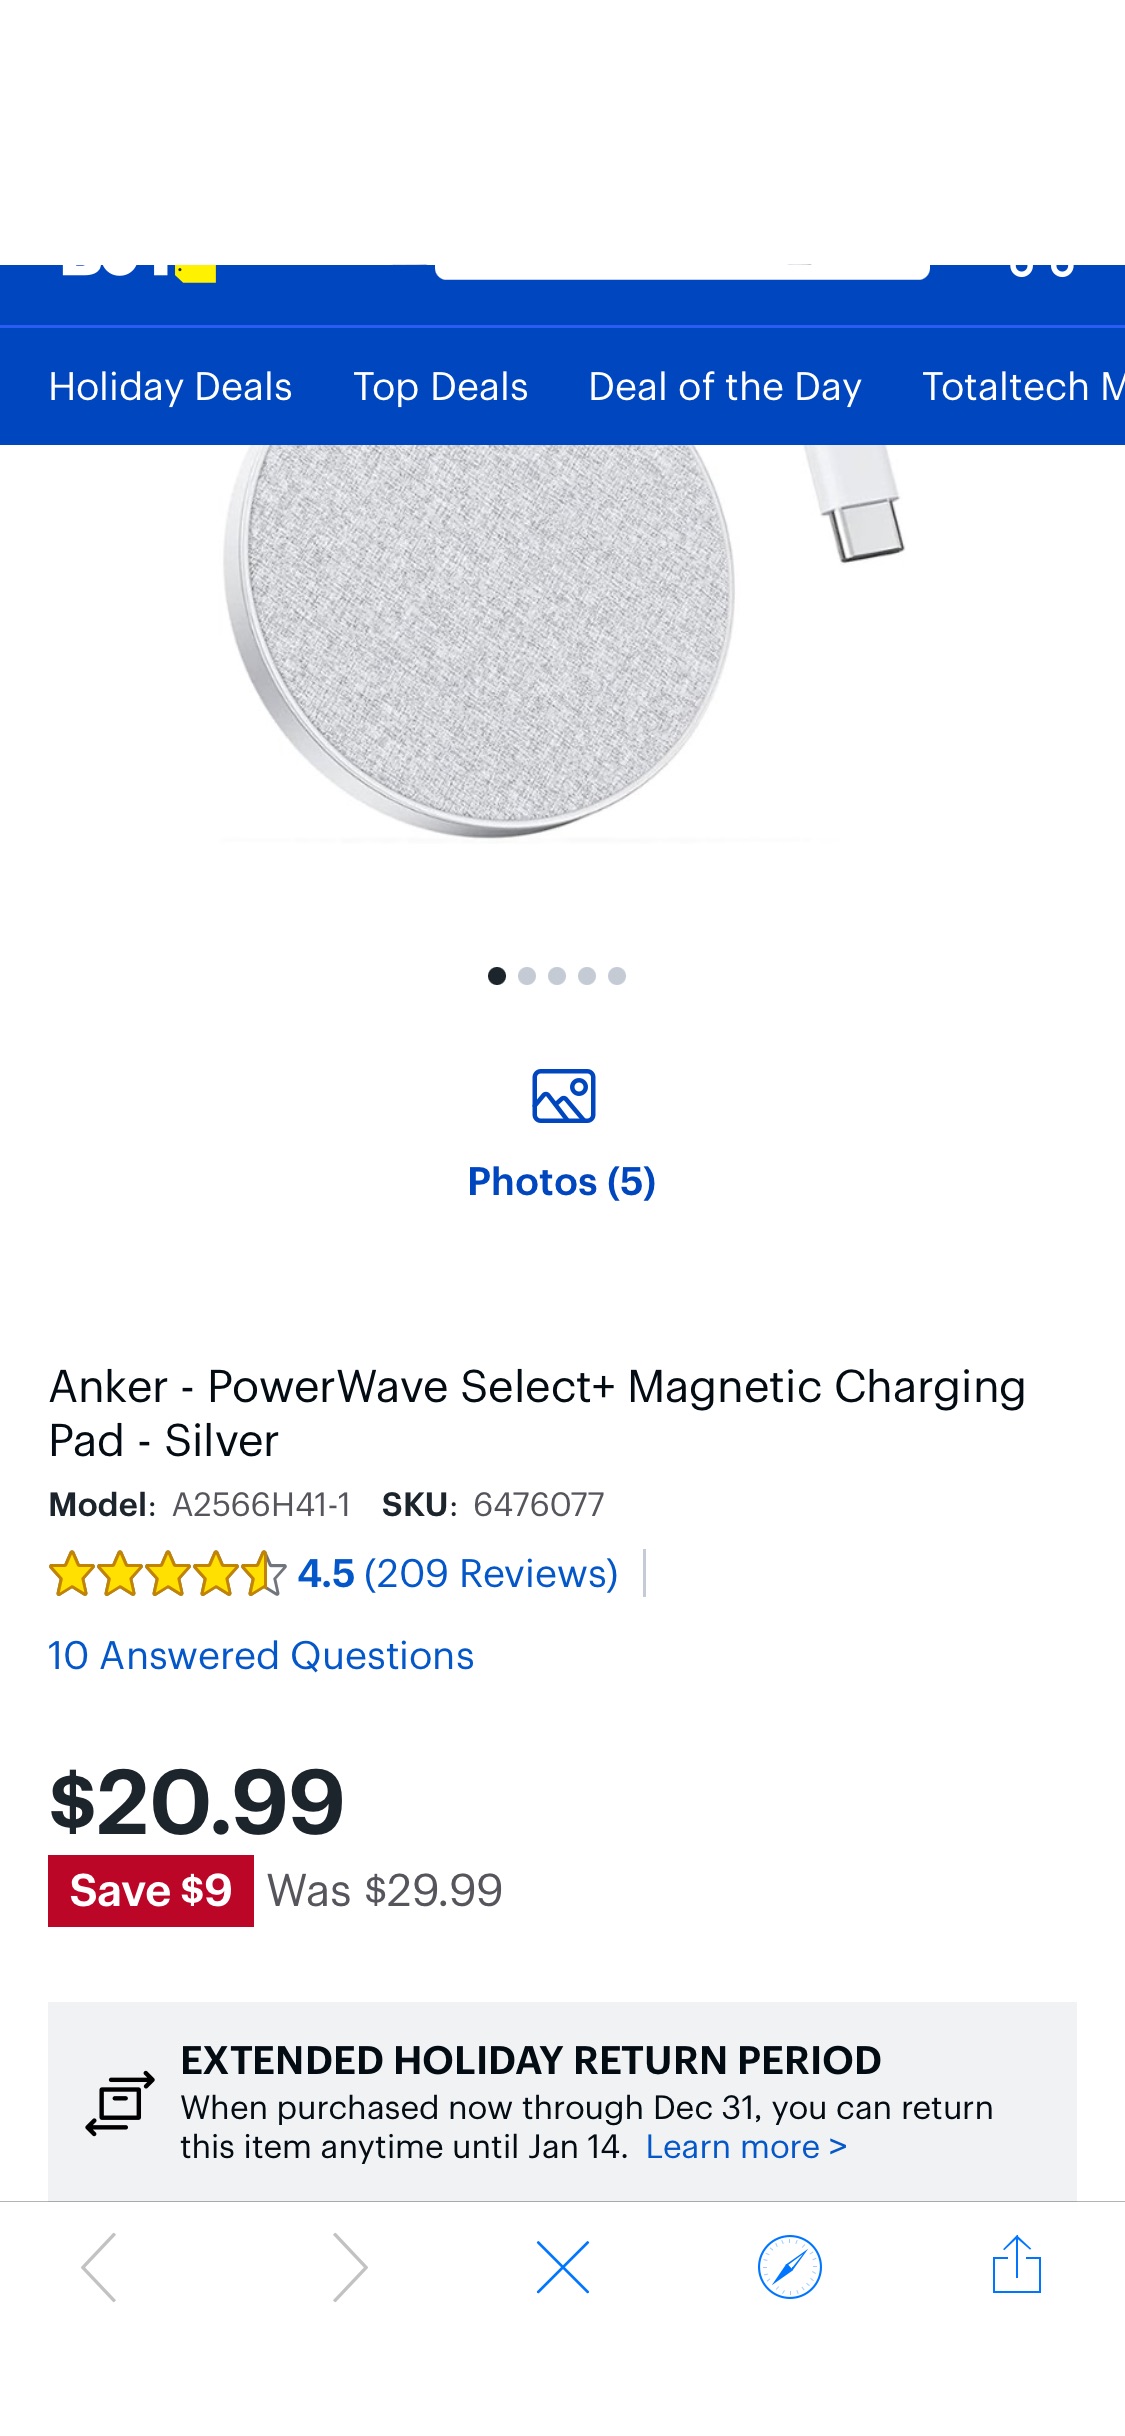 Anker PowerWave Select+ Magnetic Charging Pad Silver A2566H41-1 - Best Buy